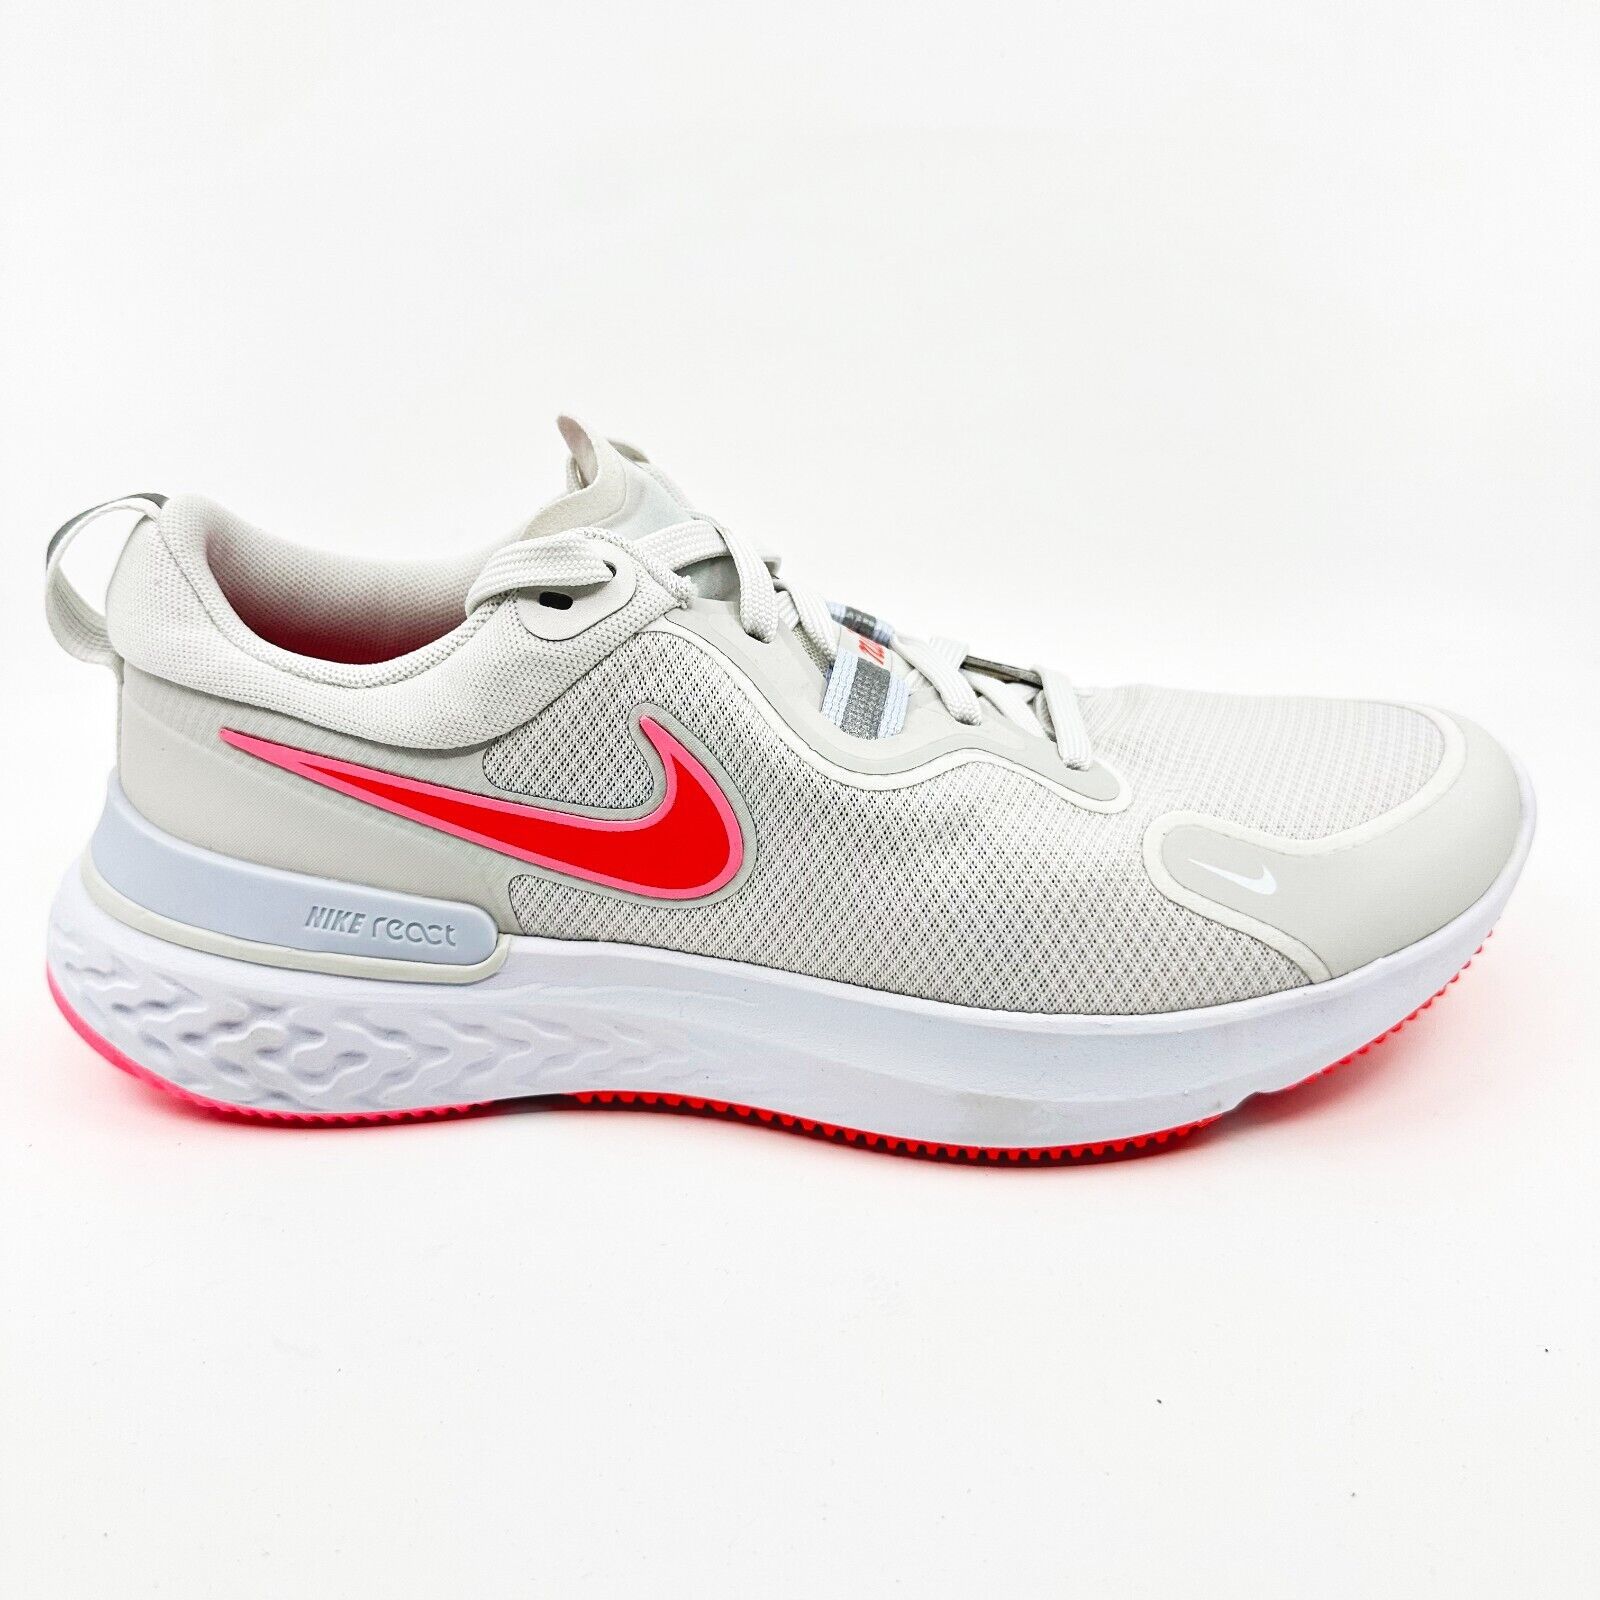 Primary image for Nike React Miler Platinum Tint Bright Crimson Womens Size 10.5 Running Sneakers